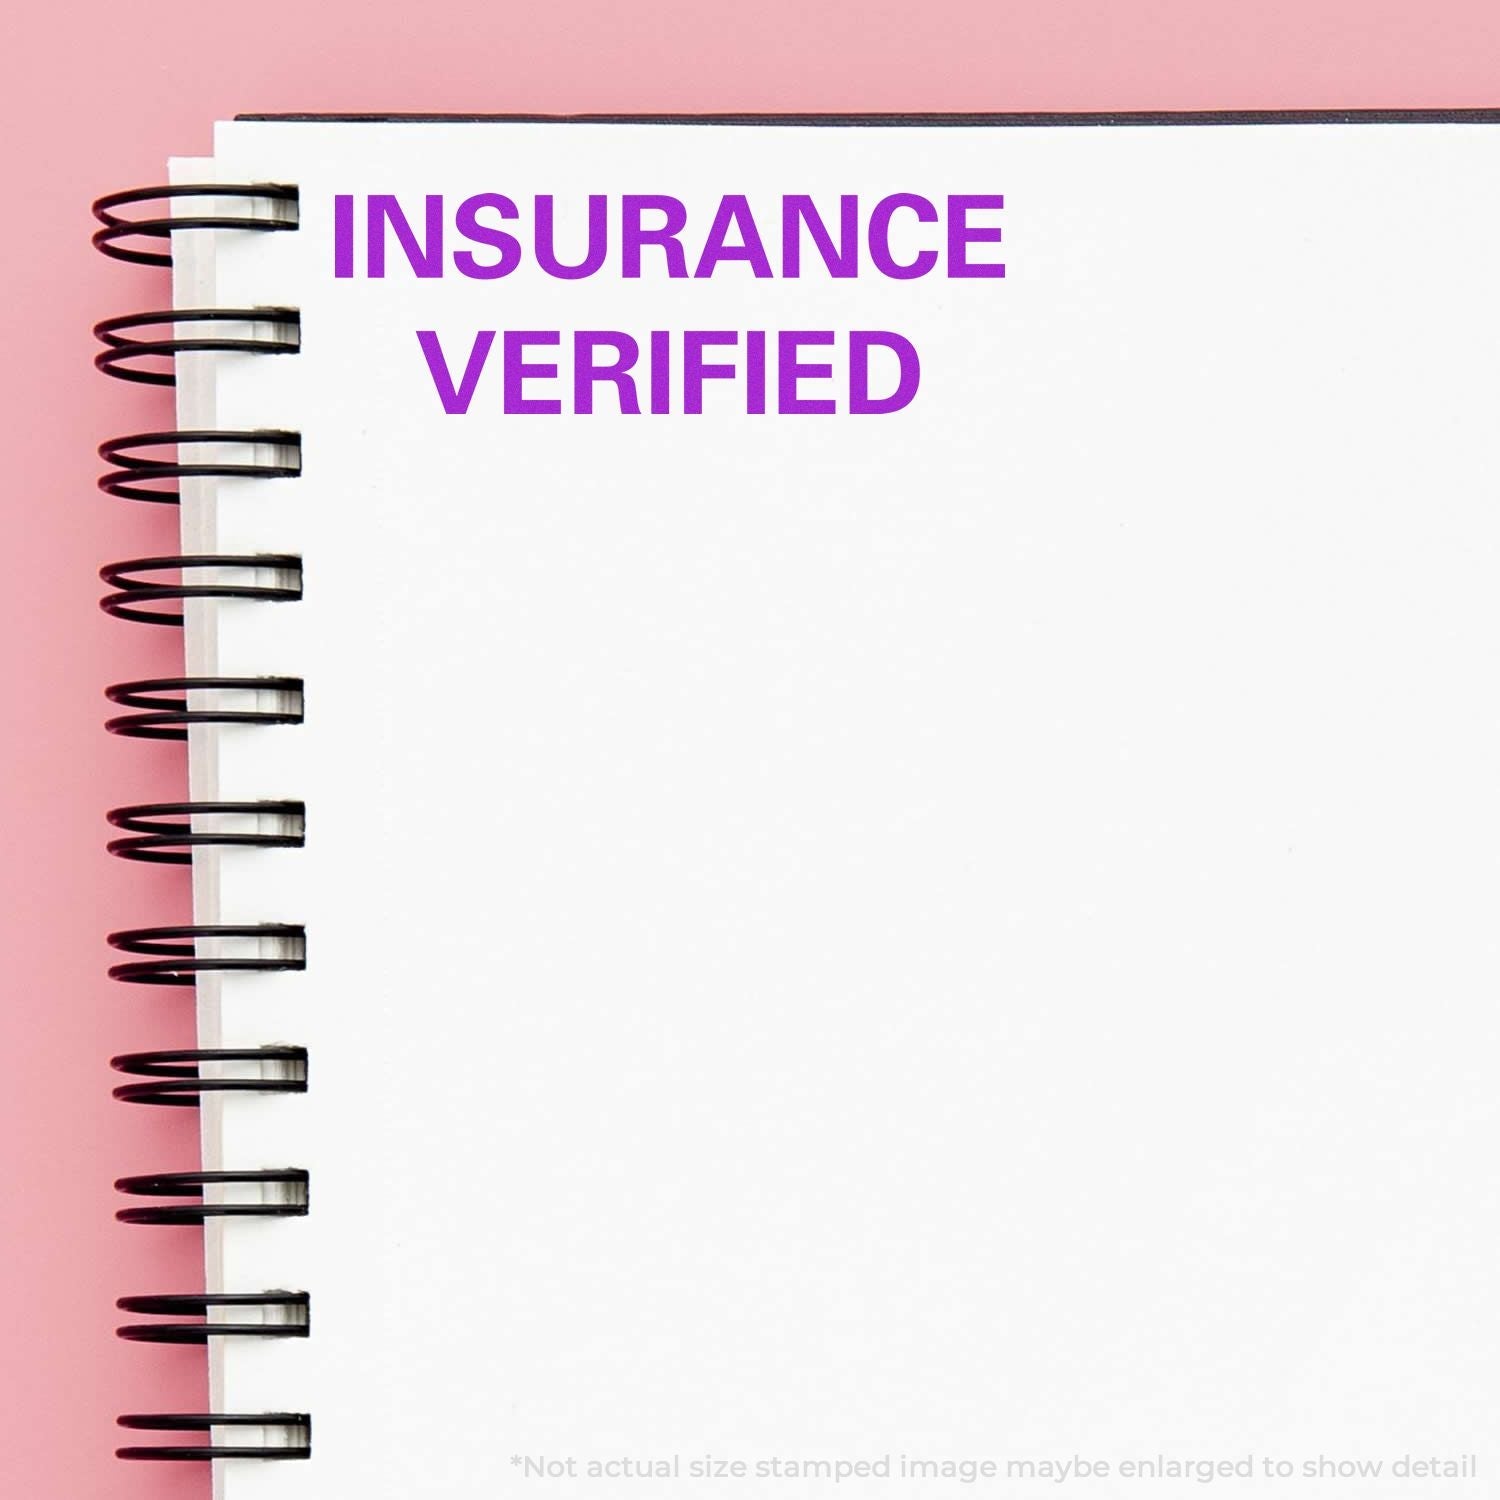 A self-inking stamp with a stamped image showing how the text "INSURANCE VERIFIED" is displayed after stamping.